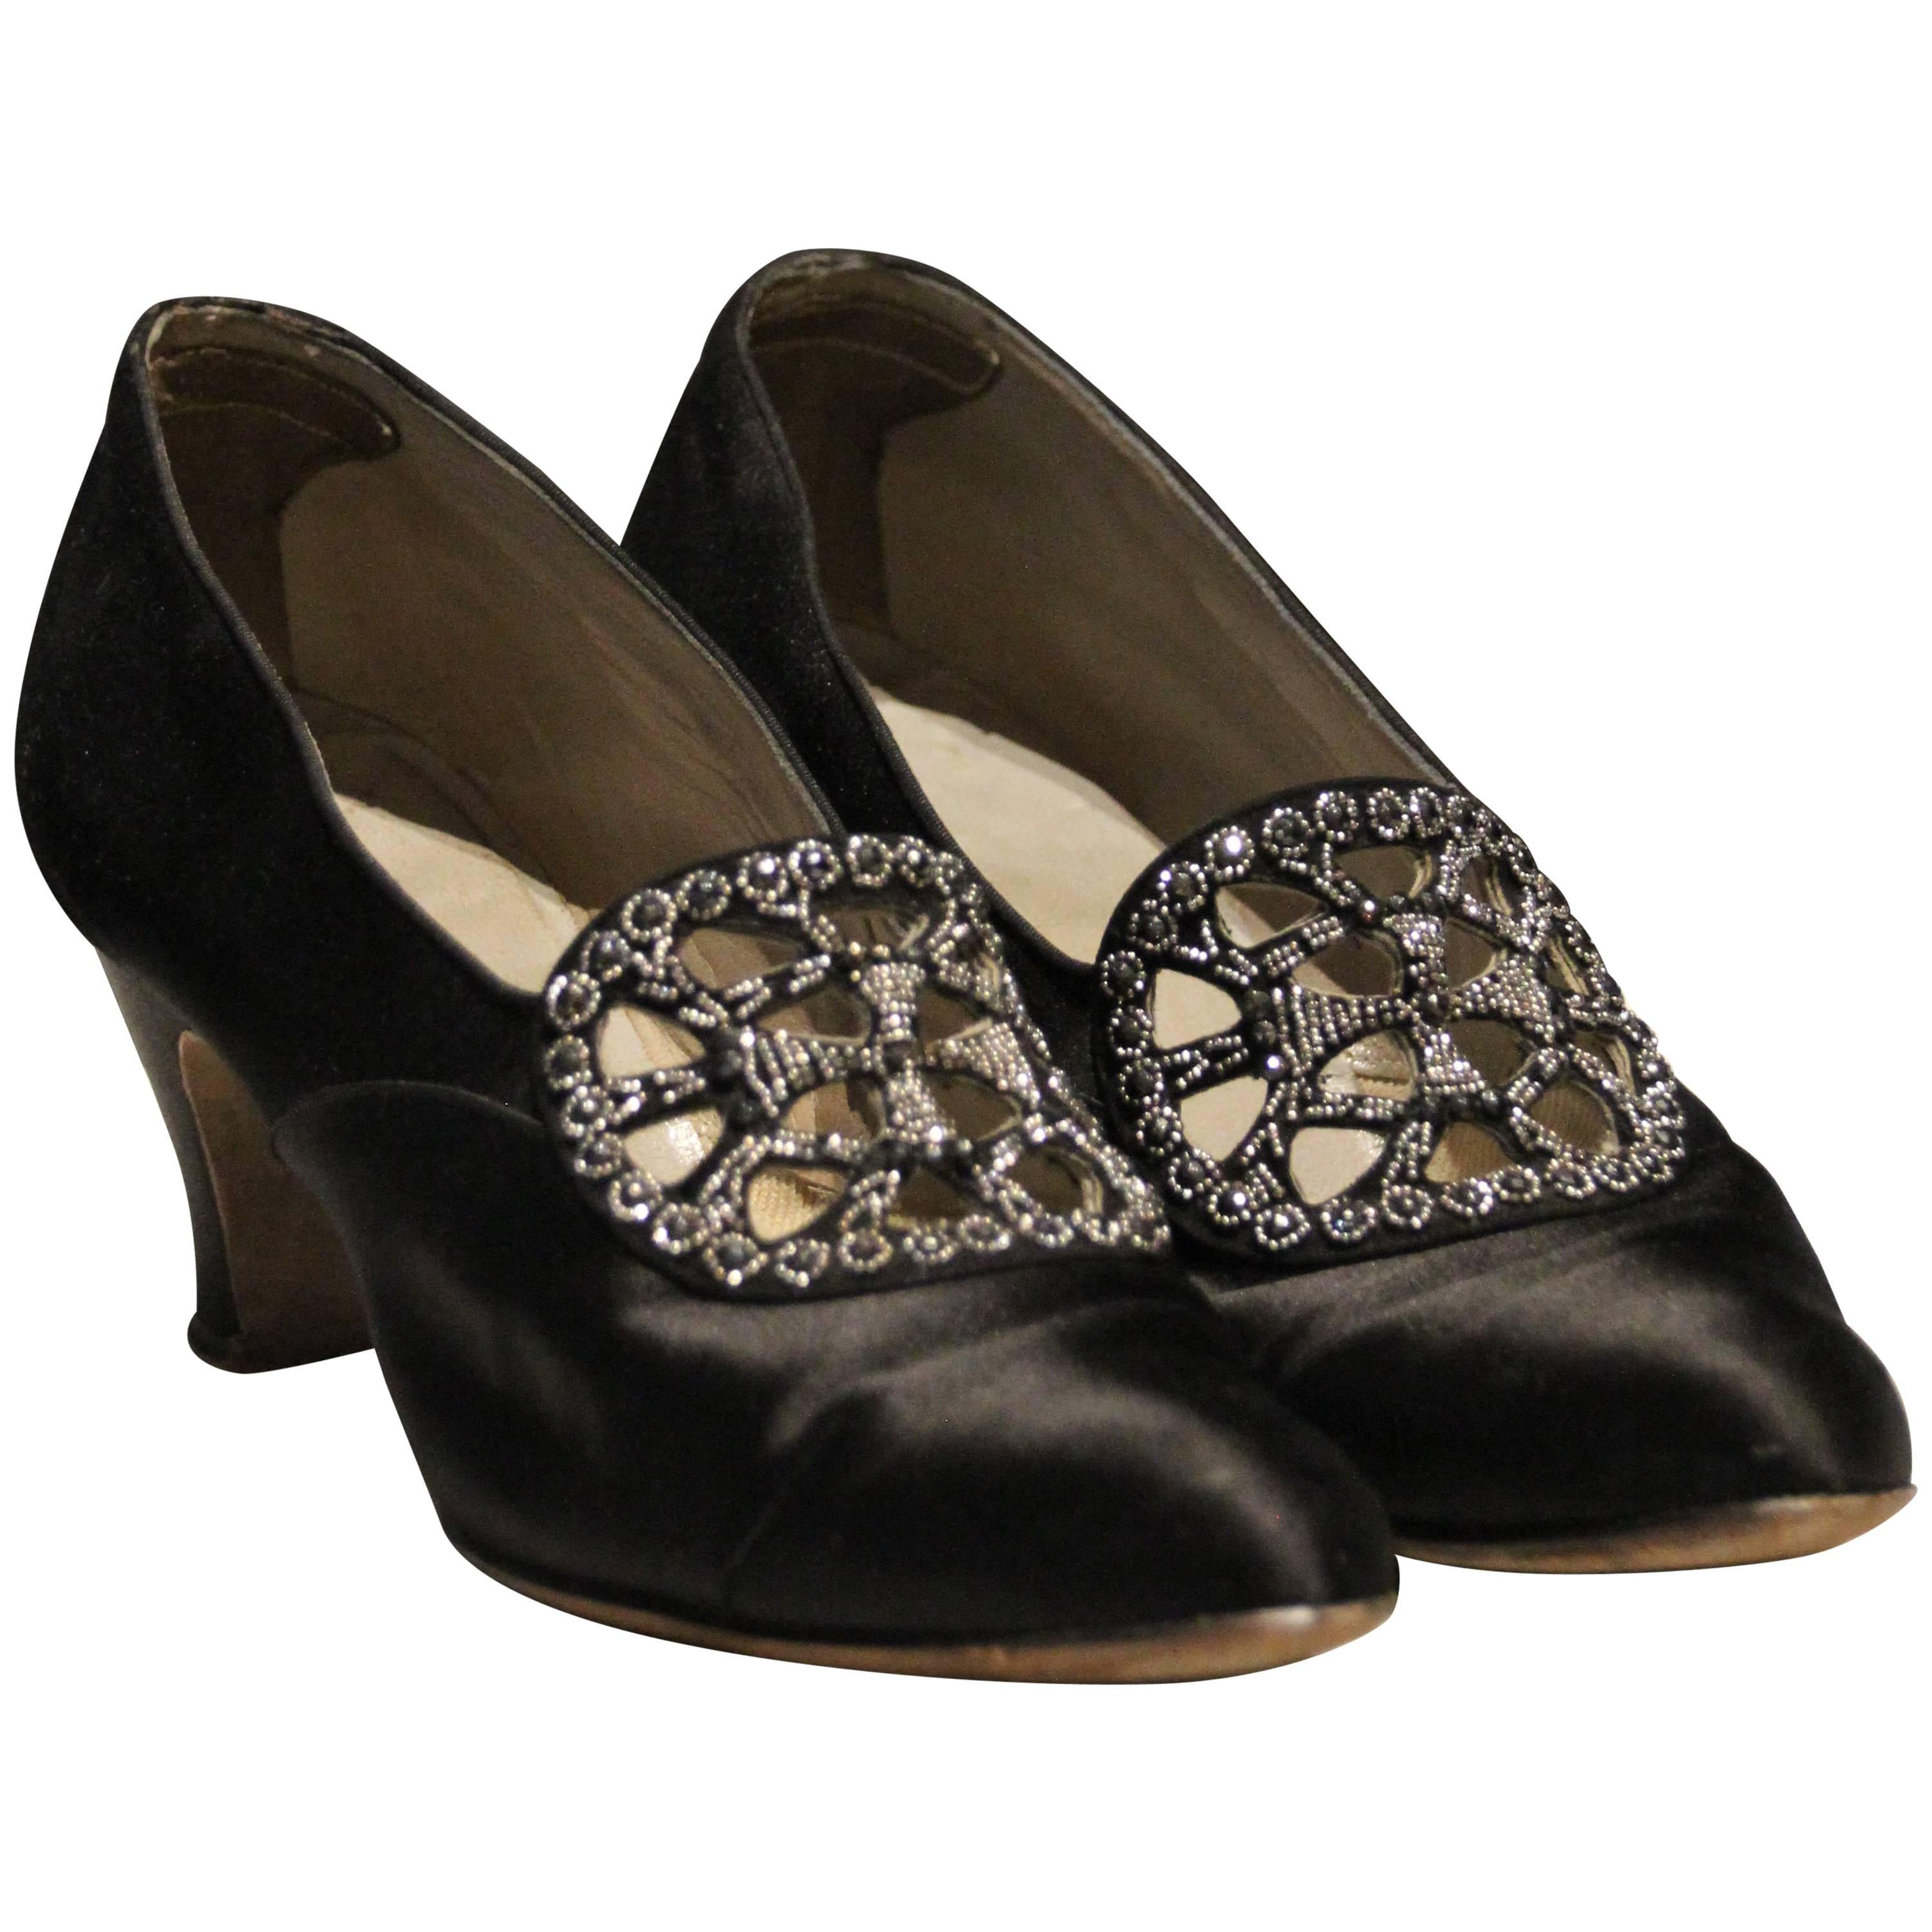 1920s Art Deco Black Silk Evening Pumps w Beautiful Marcasite Beading at Throat  For Sale